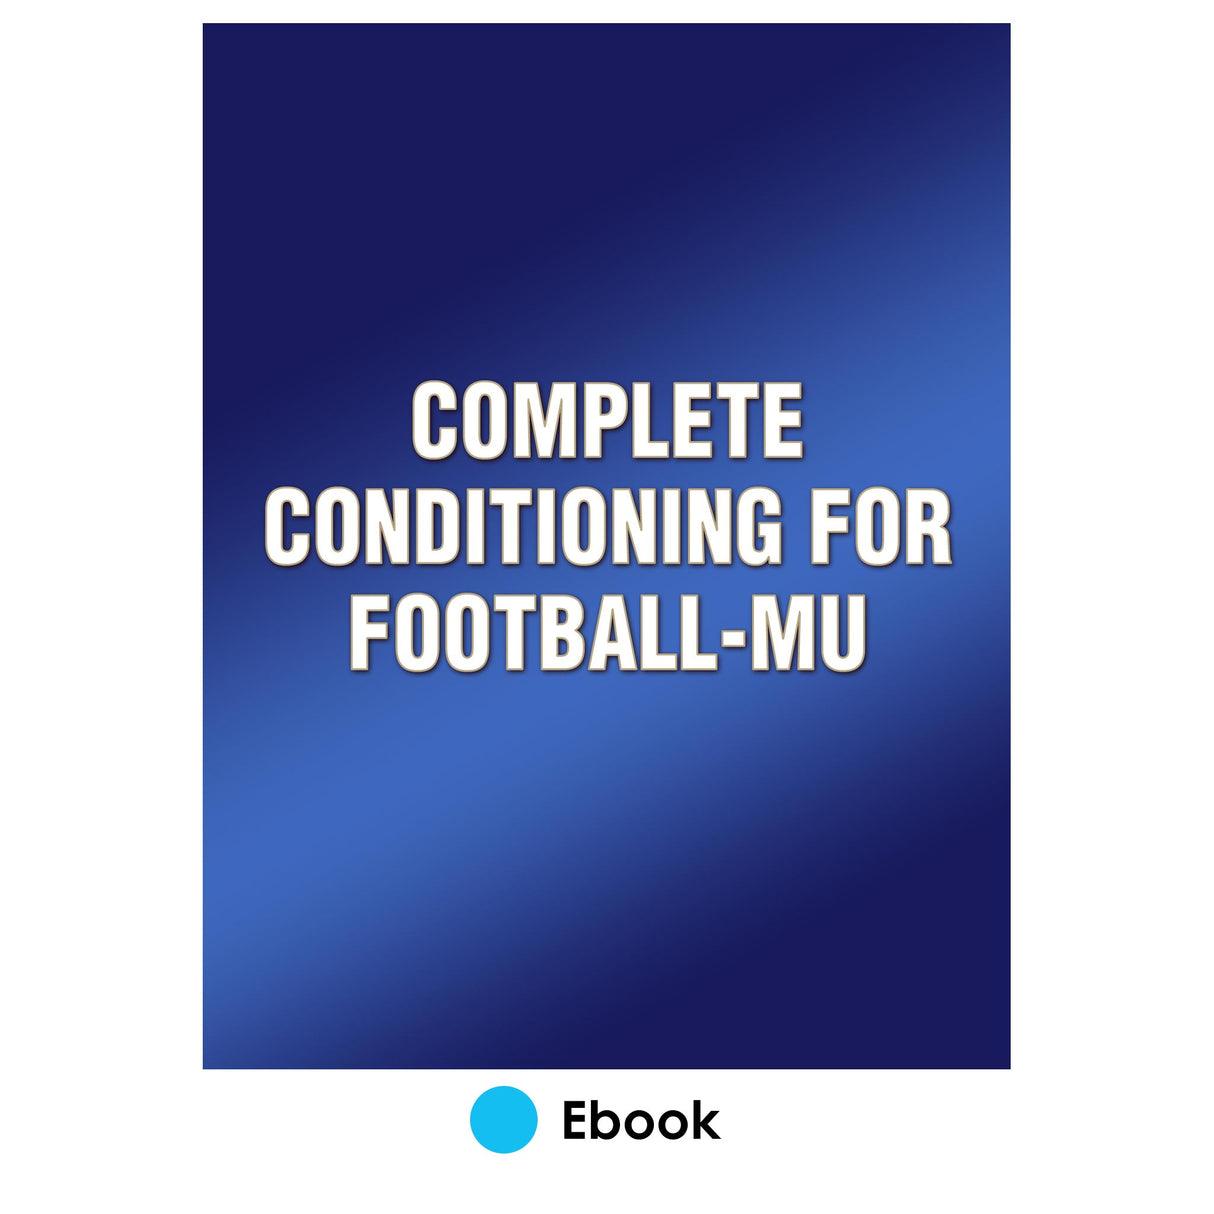 Complete Conditioning for Football-MU